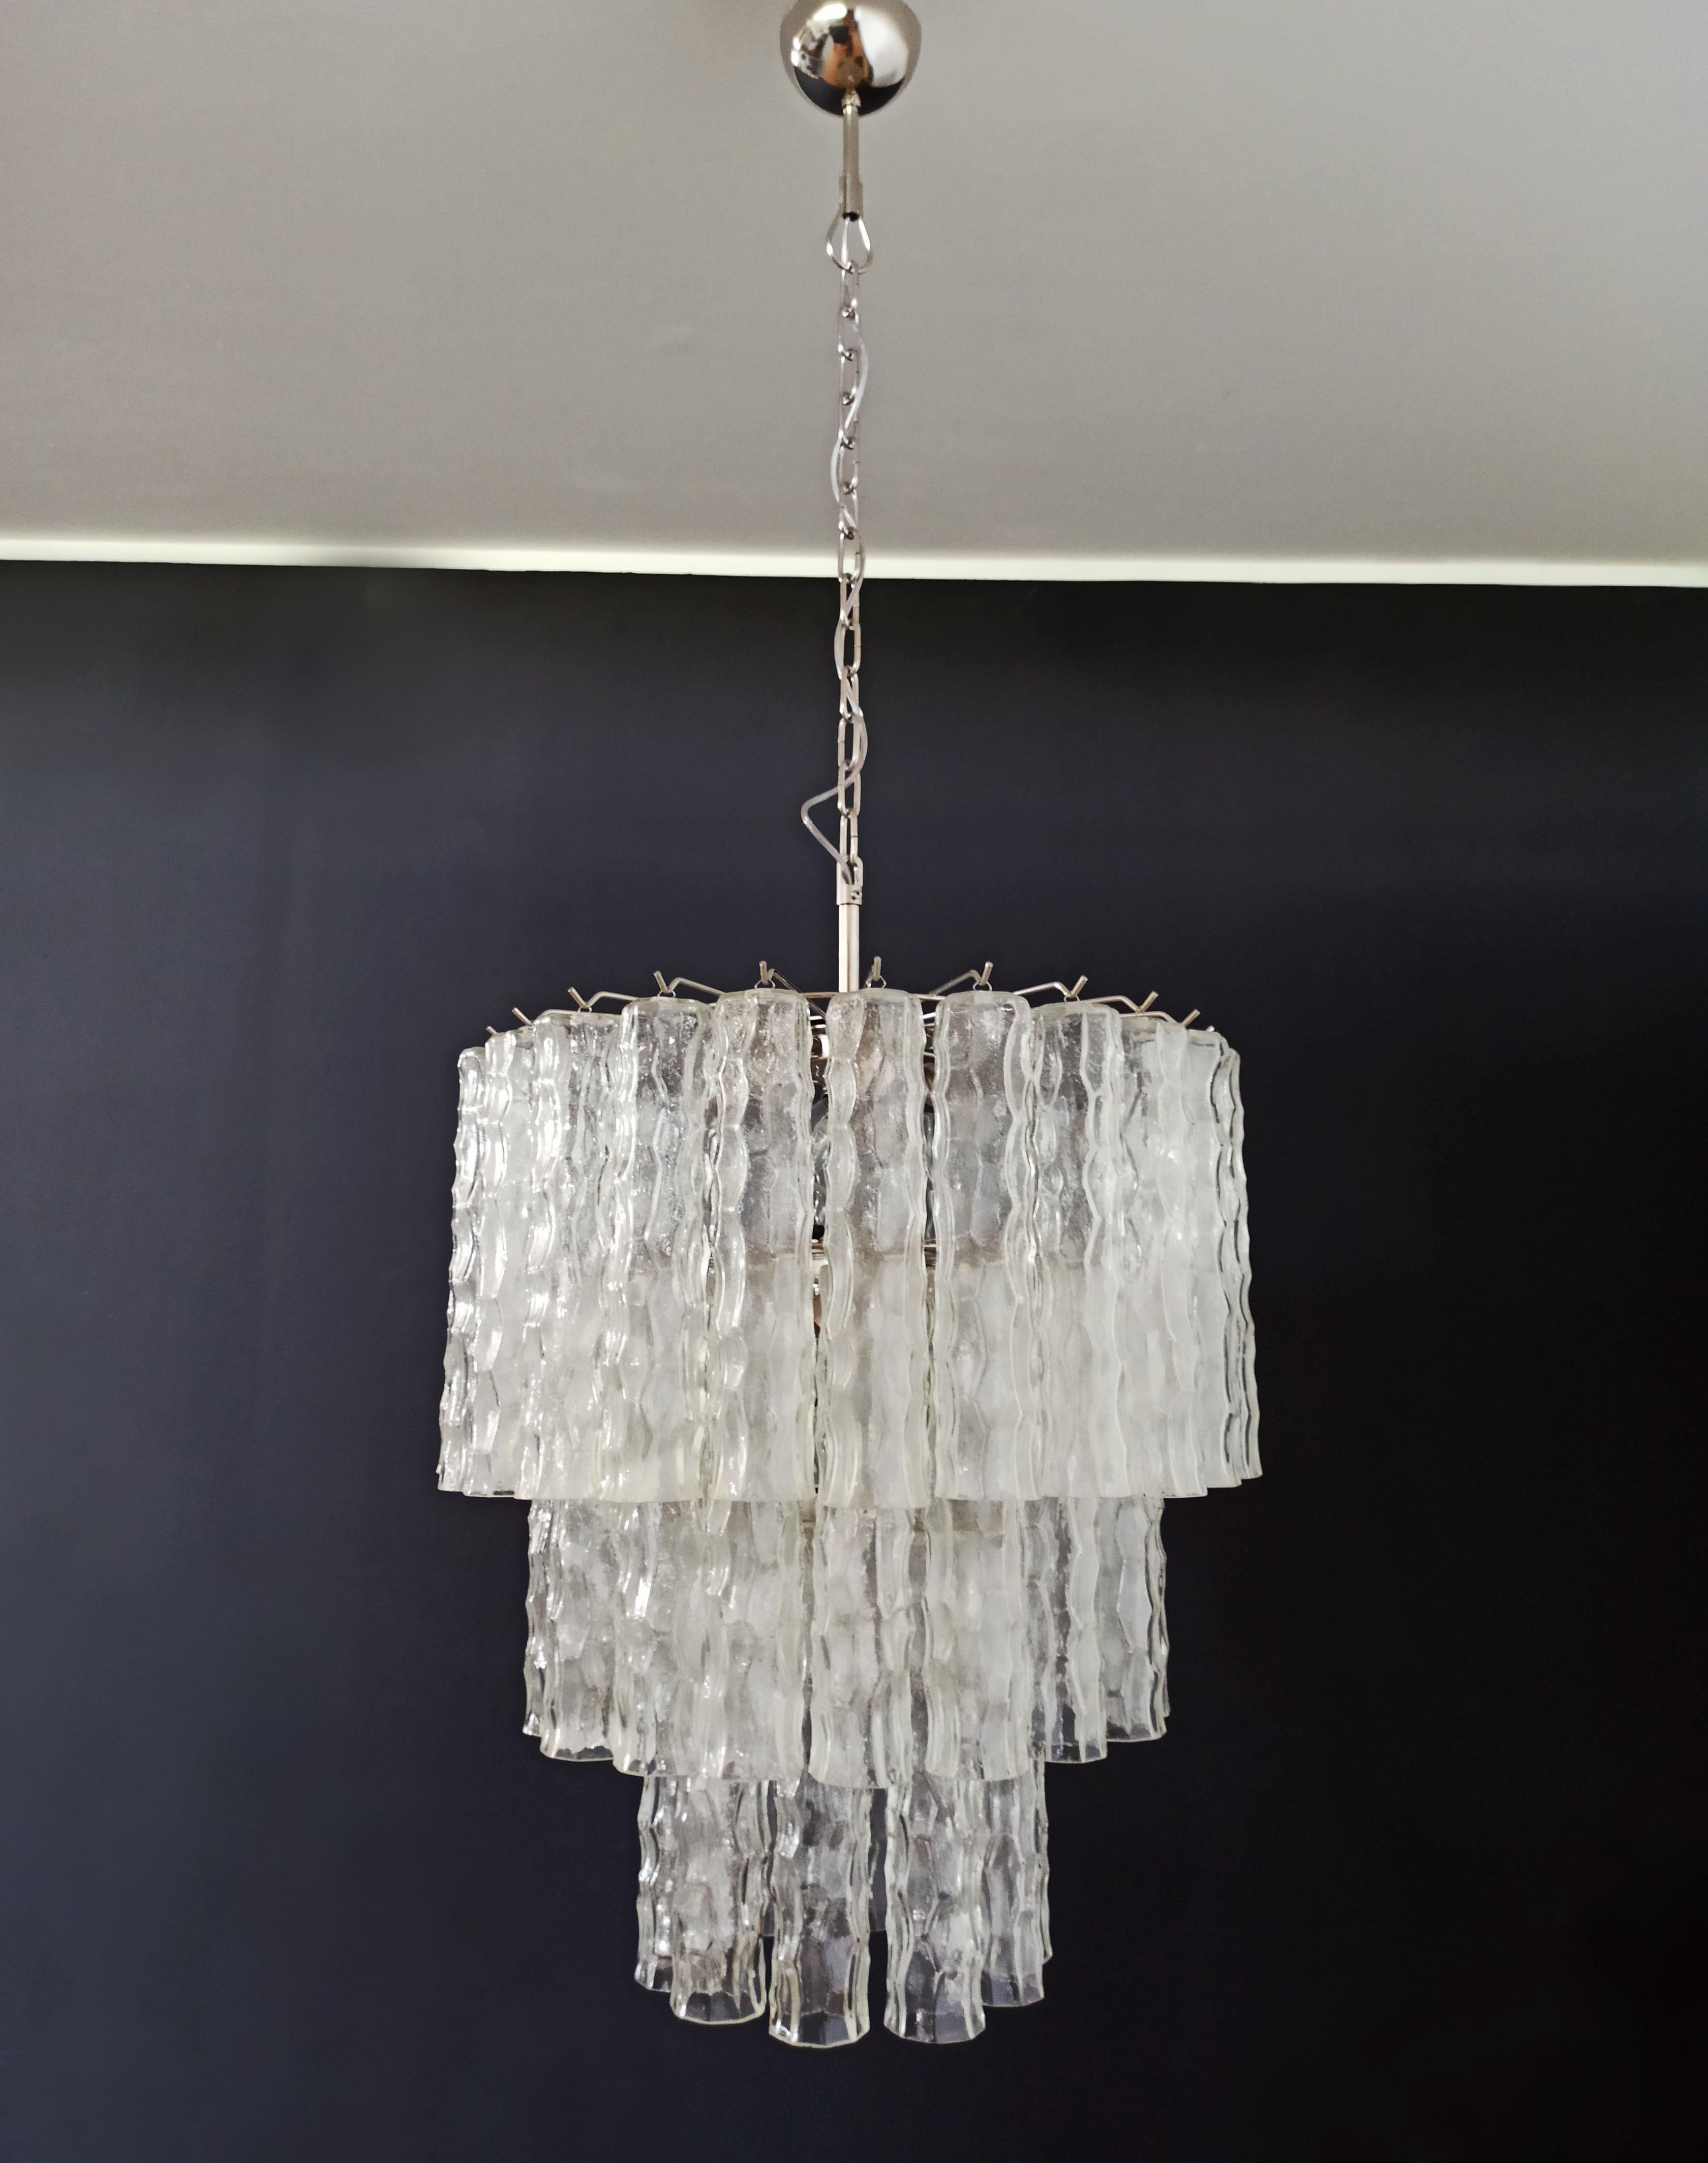 Vintage Italian Murano glass chandelier and nickel-plated metal structure. The shiny nickel armor supports 52 large clear glass tubes that have a slightly hammered effect to create
an impressive 